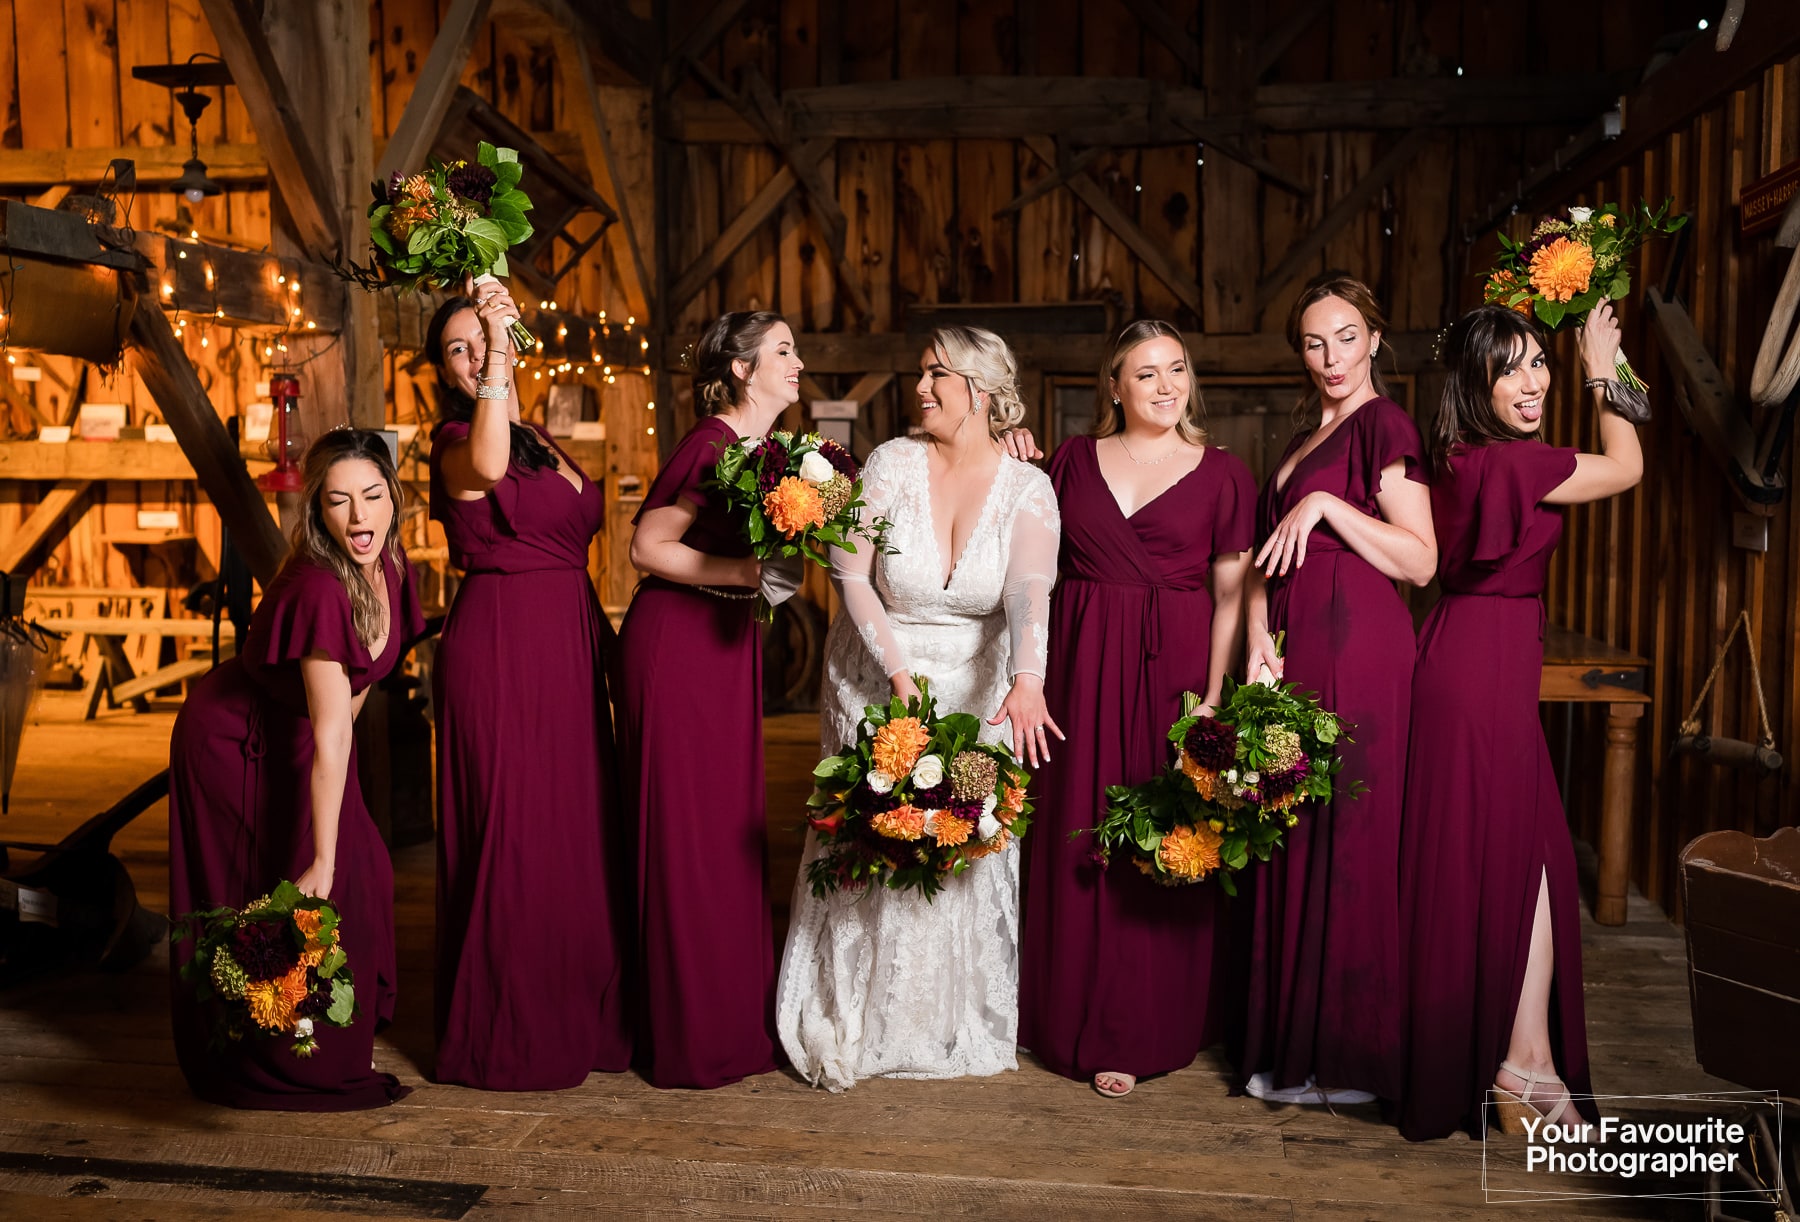 Wedding party photographed indoors in a barn, wearing burgundy